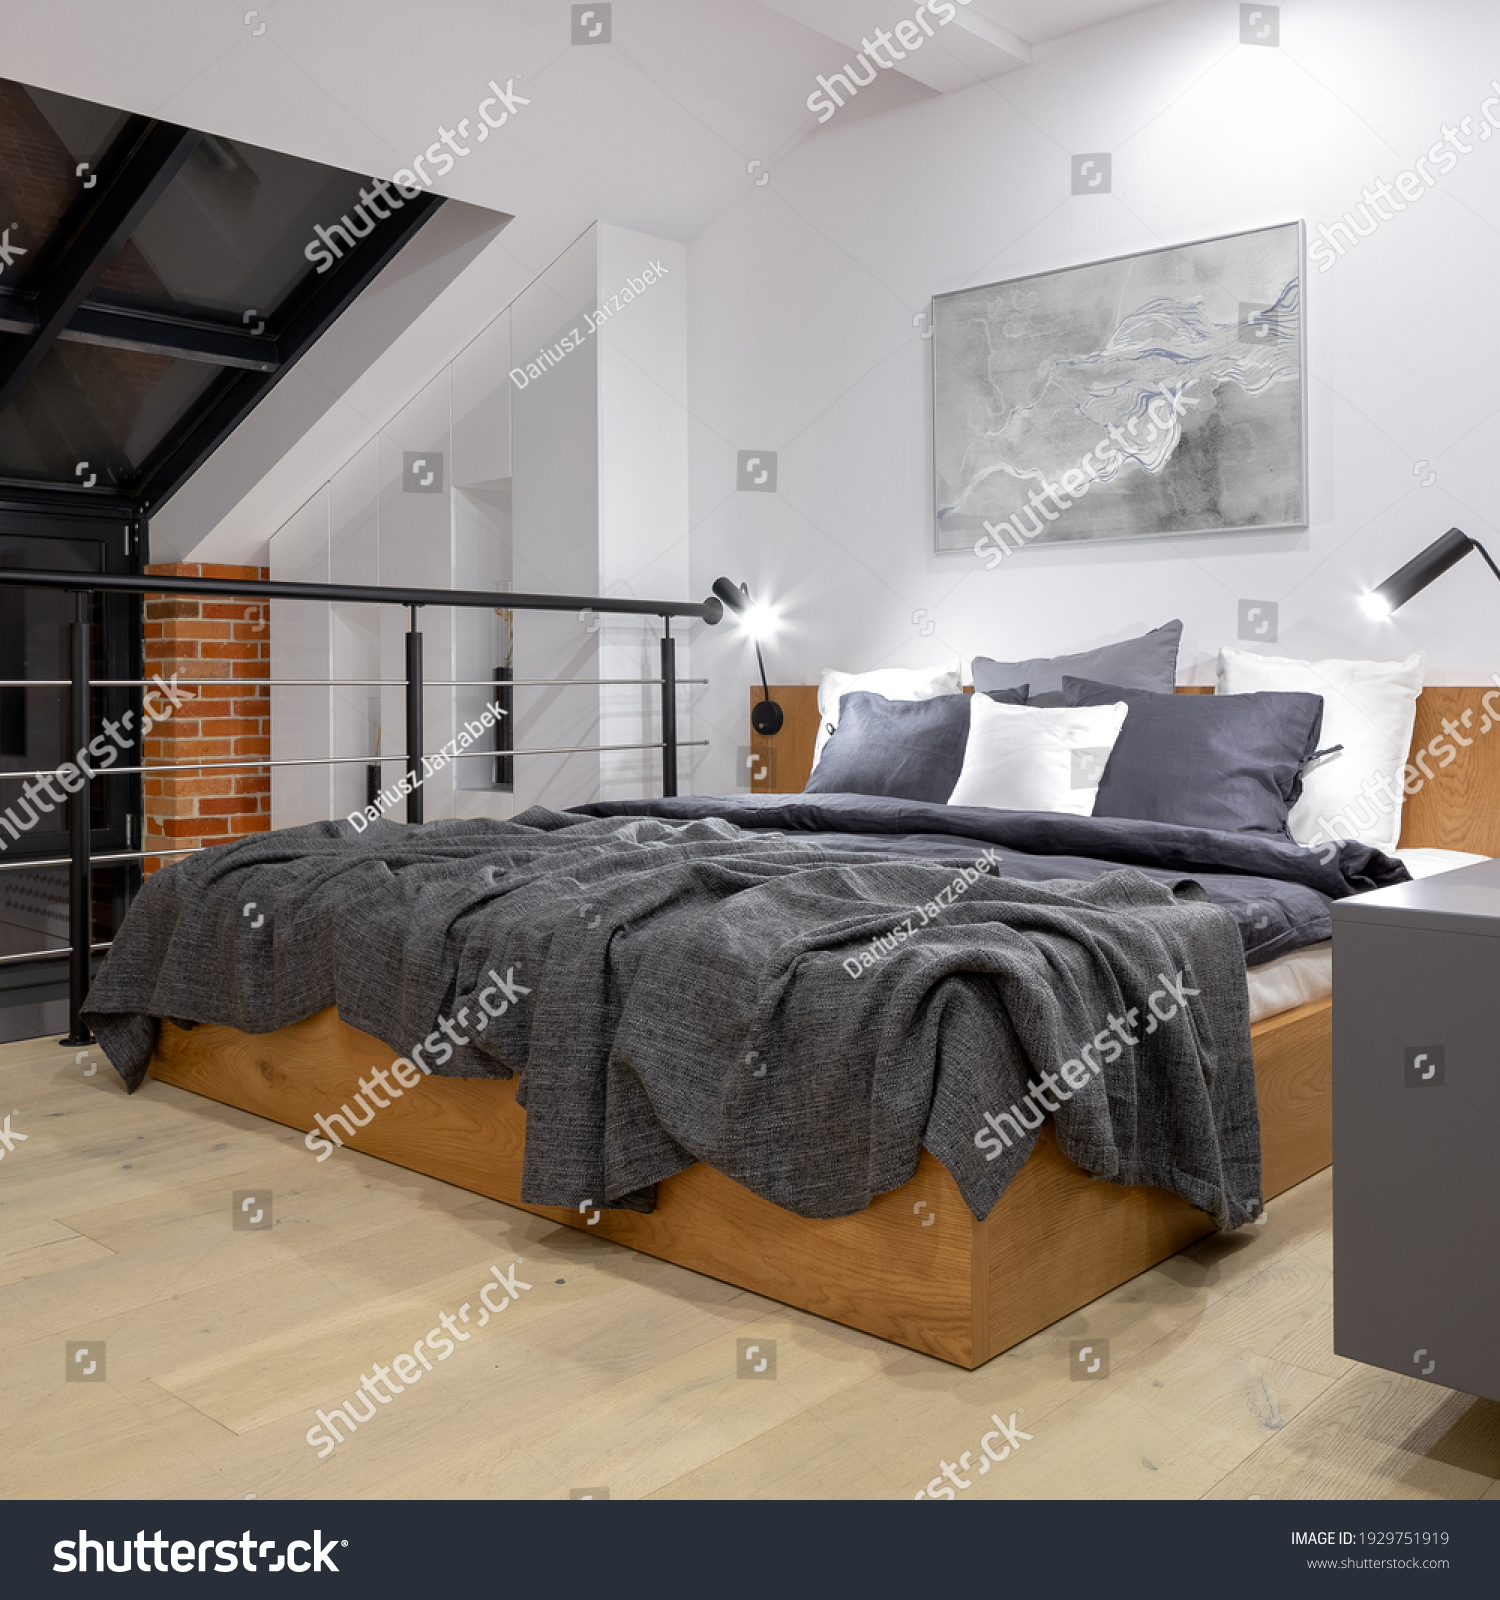 Comfortable bed on modern attic bedroom on mezzanine floor in loft style apartment with big window and white walls #1929751919